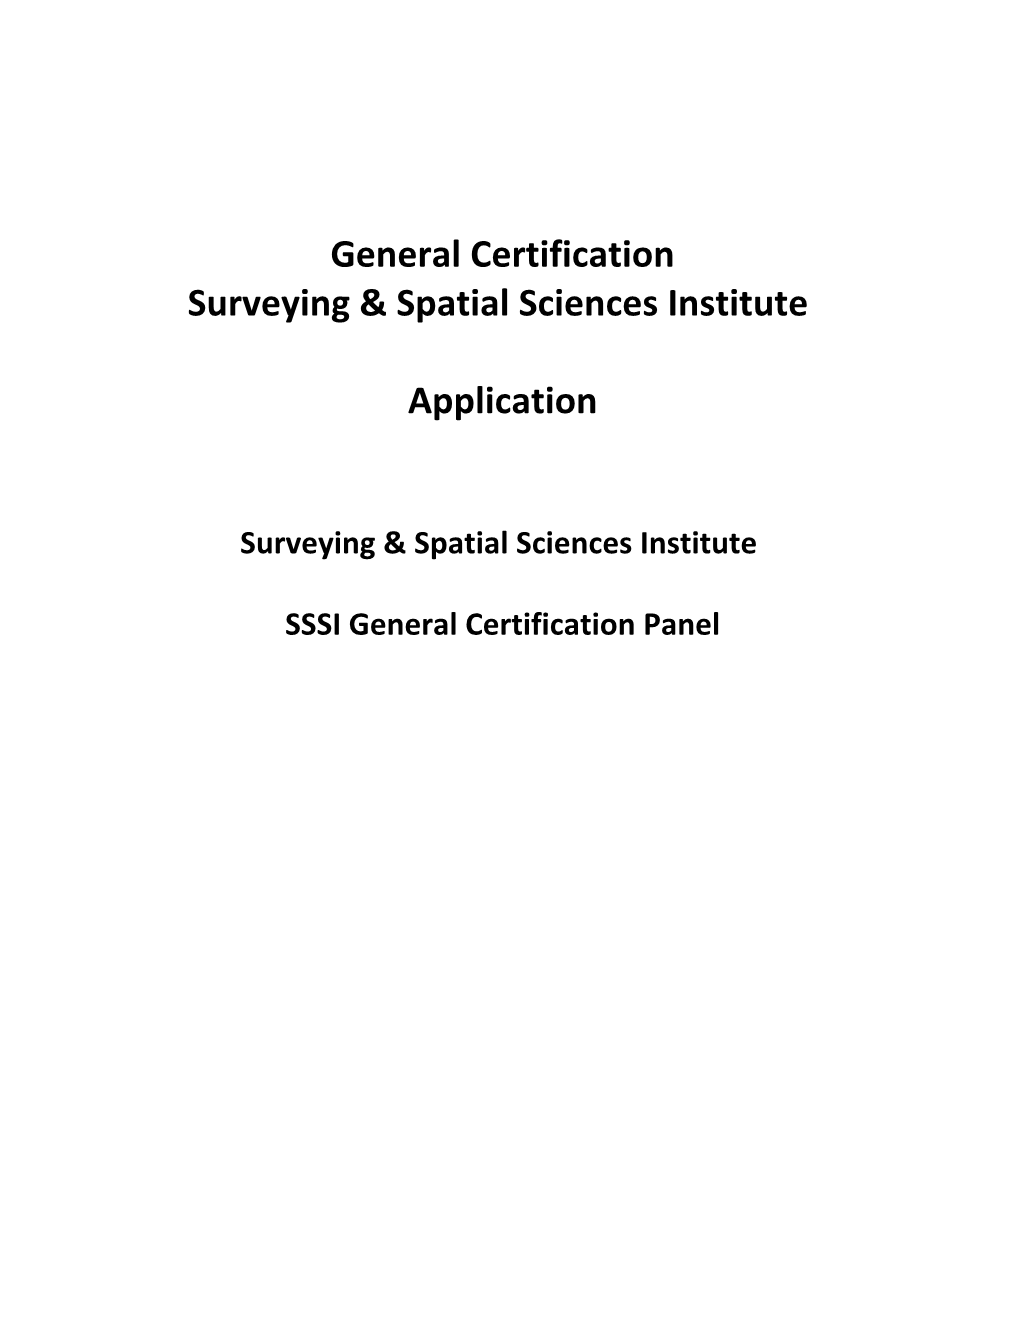 Application for SSI Spatial Information Certification